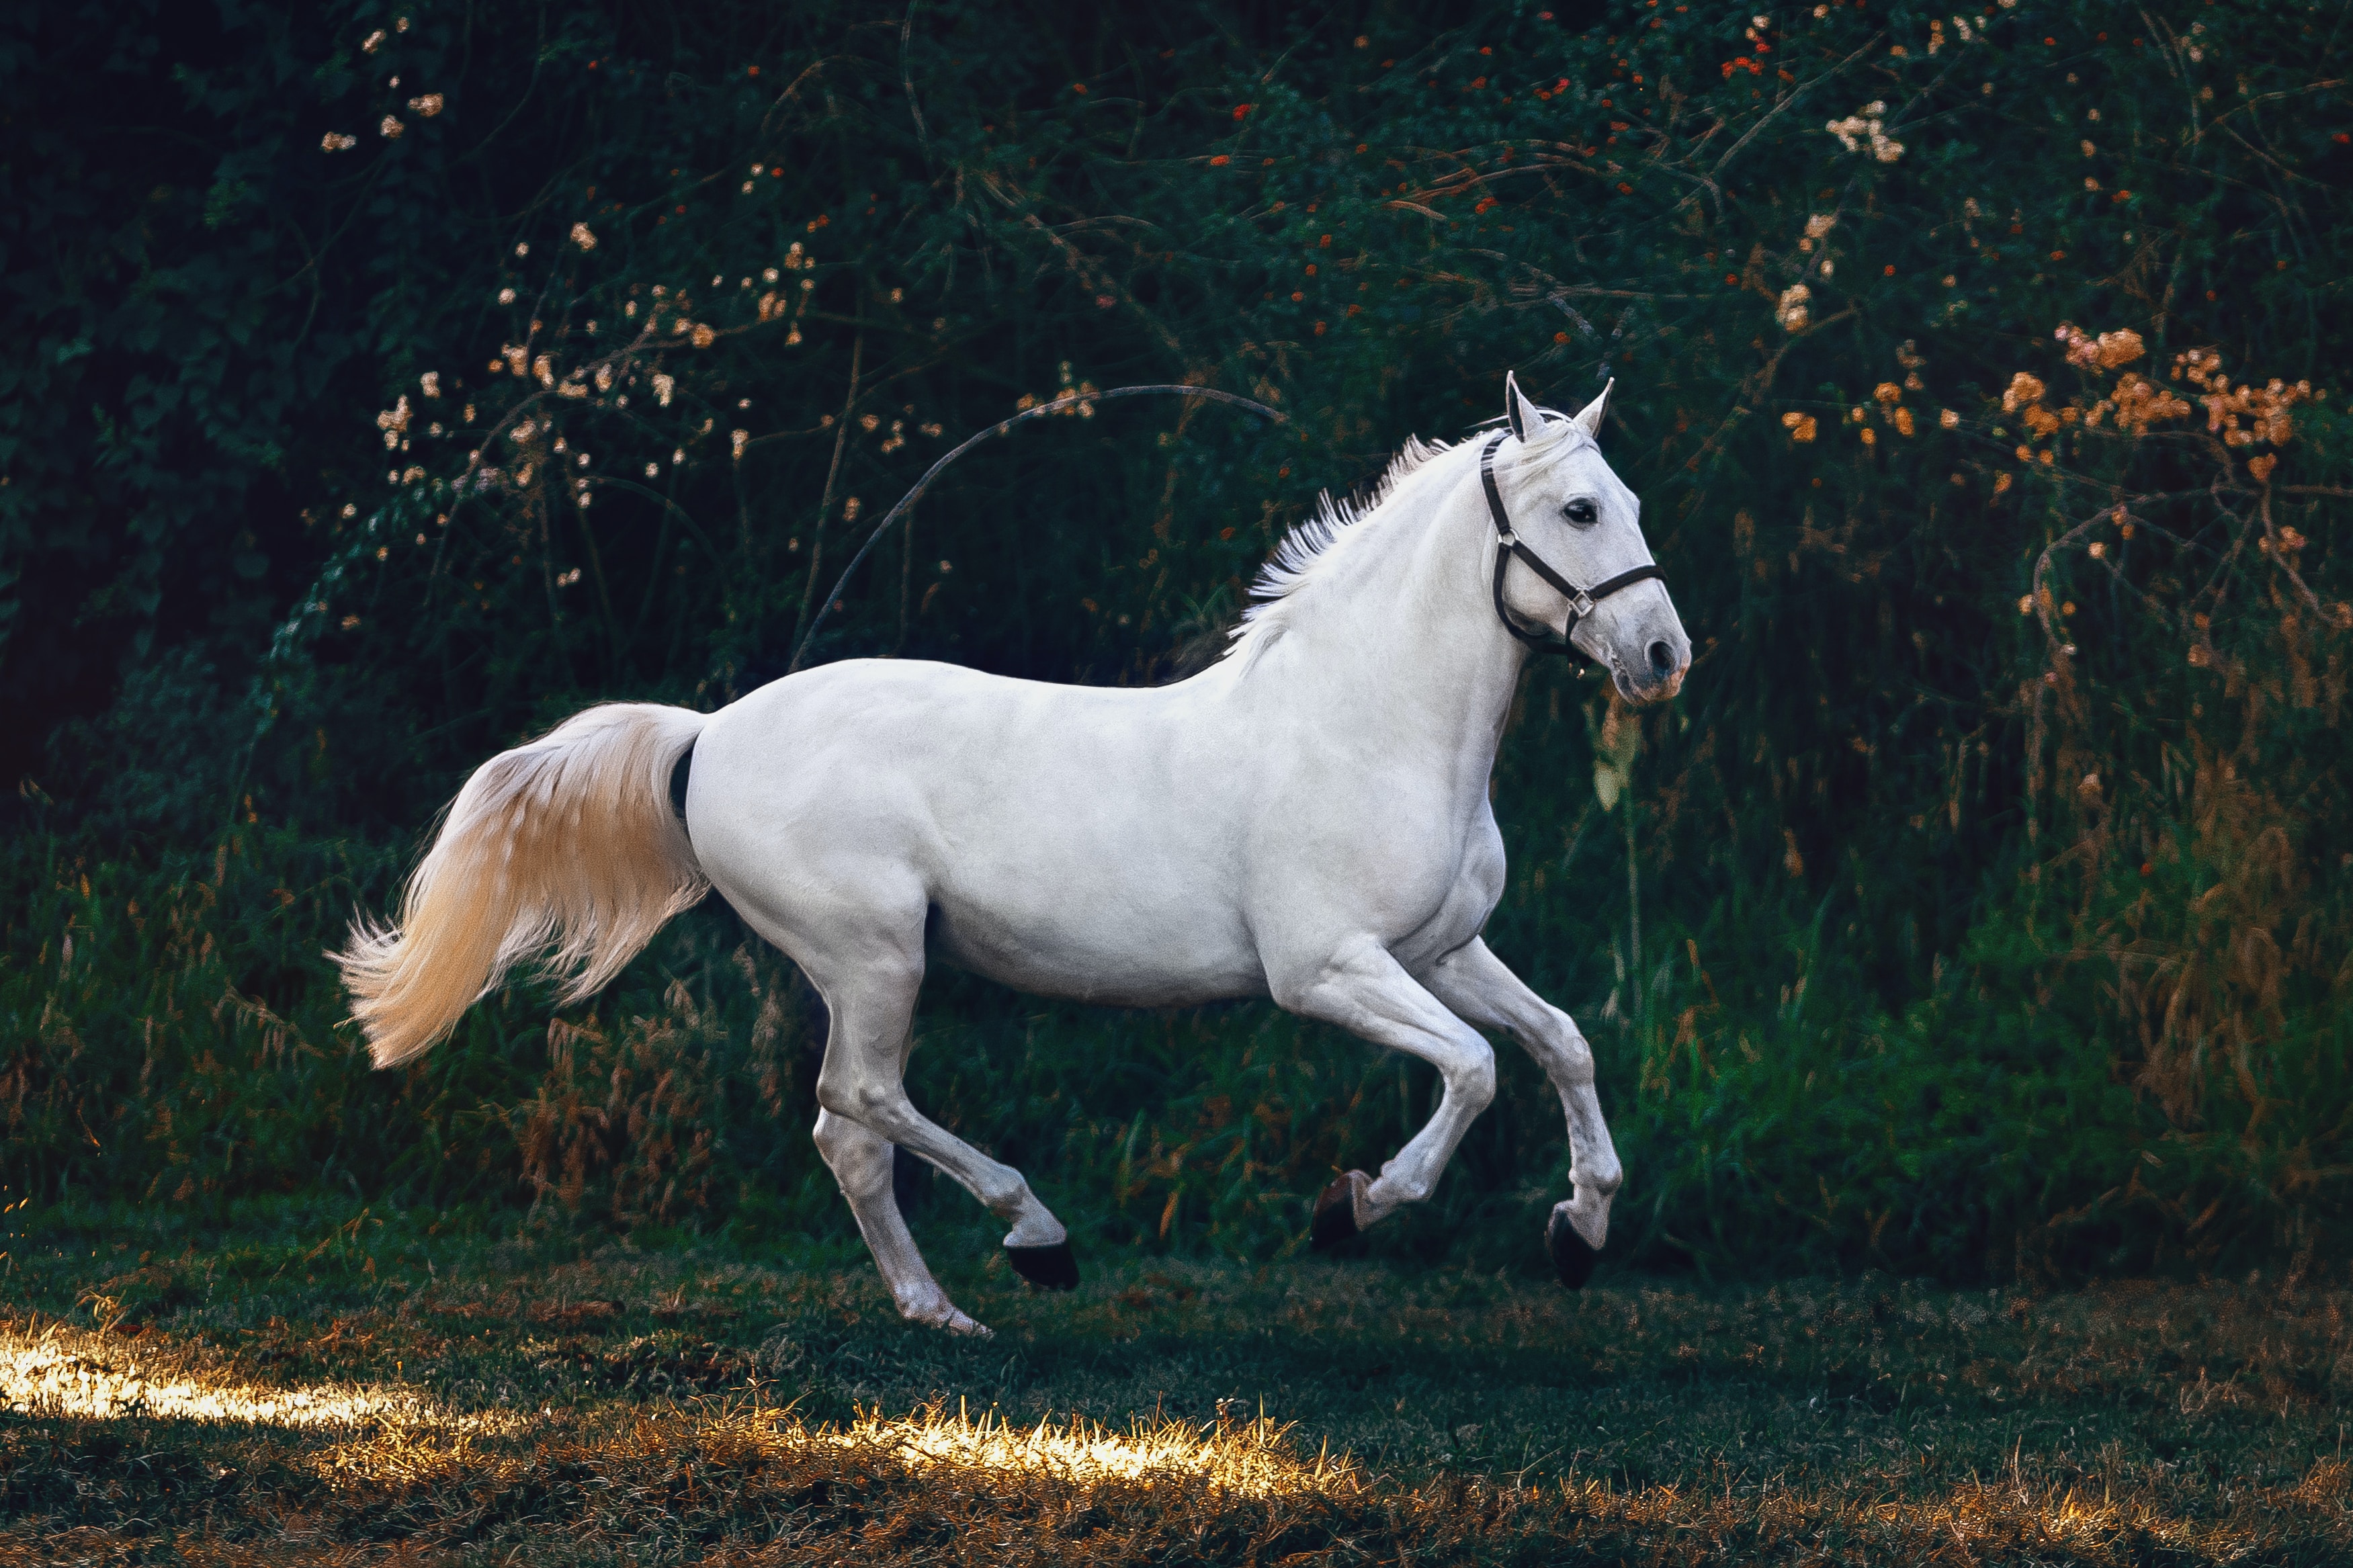 a white horse mid run in a position that can only be described as frolicking.